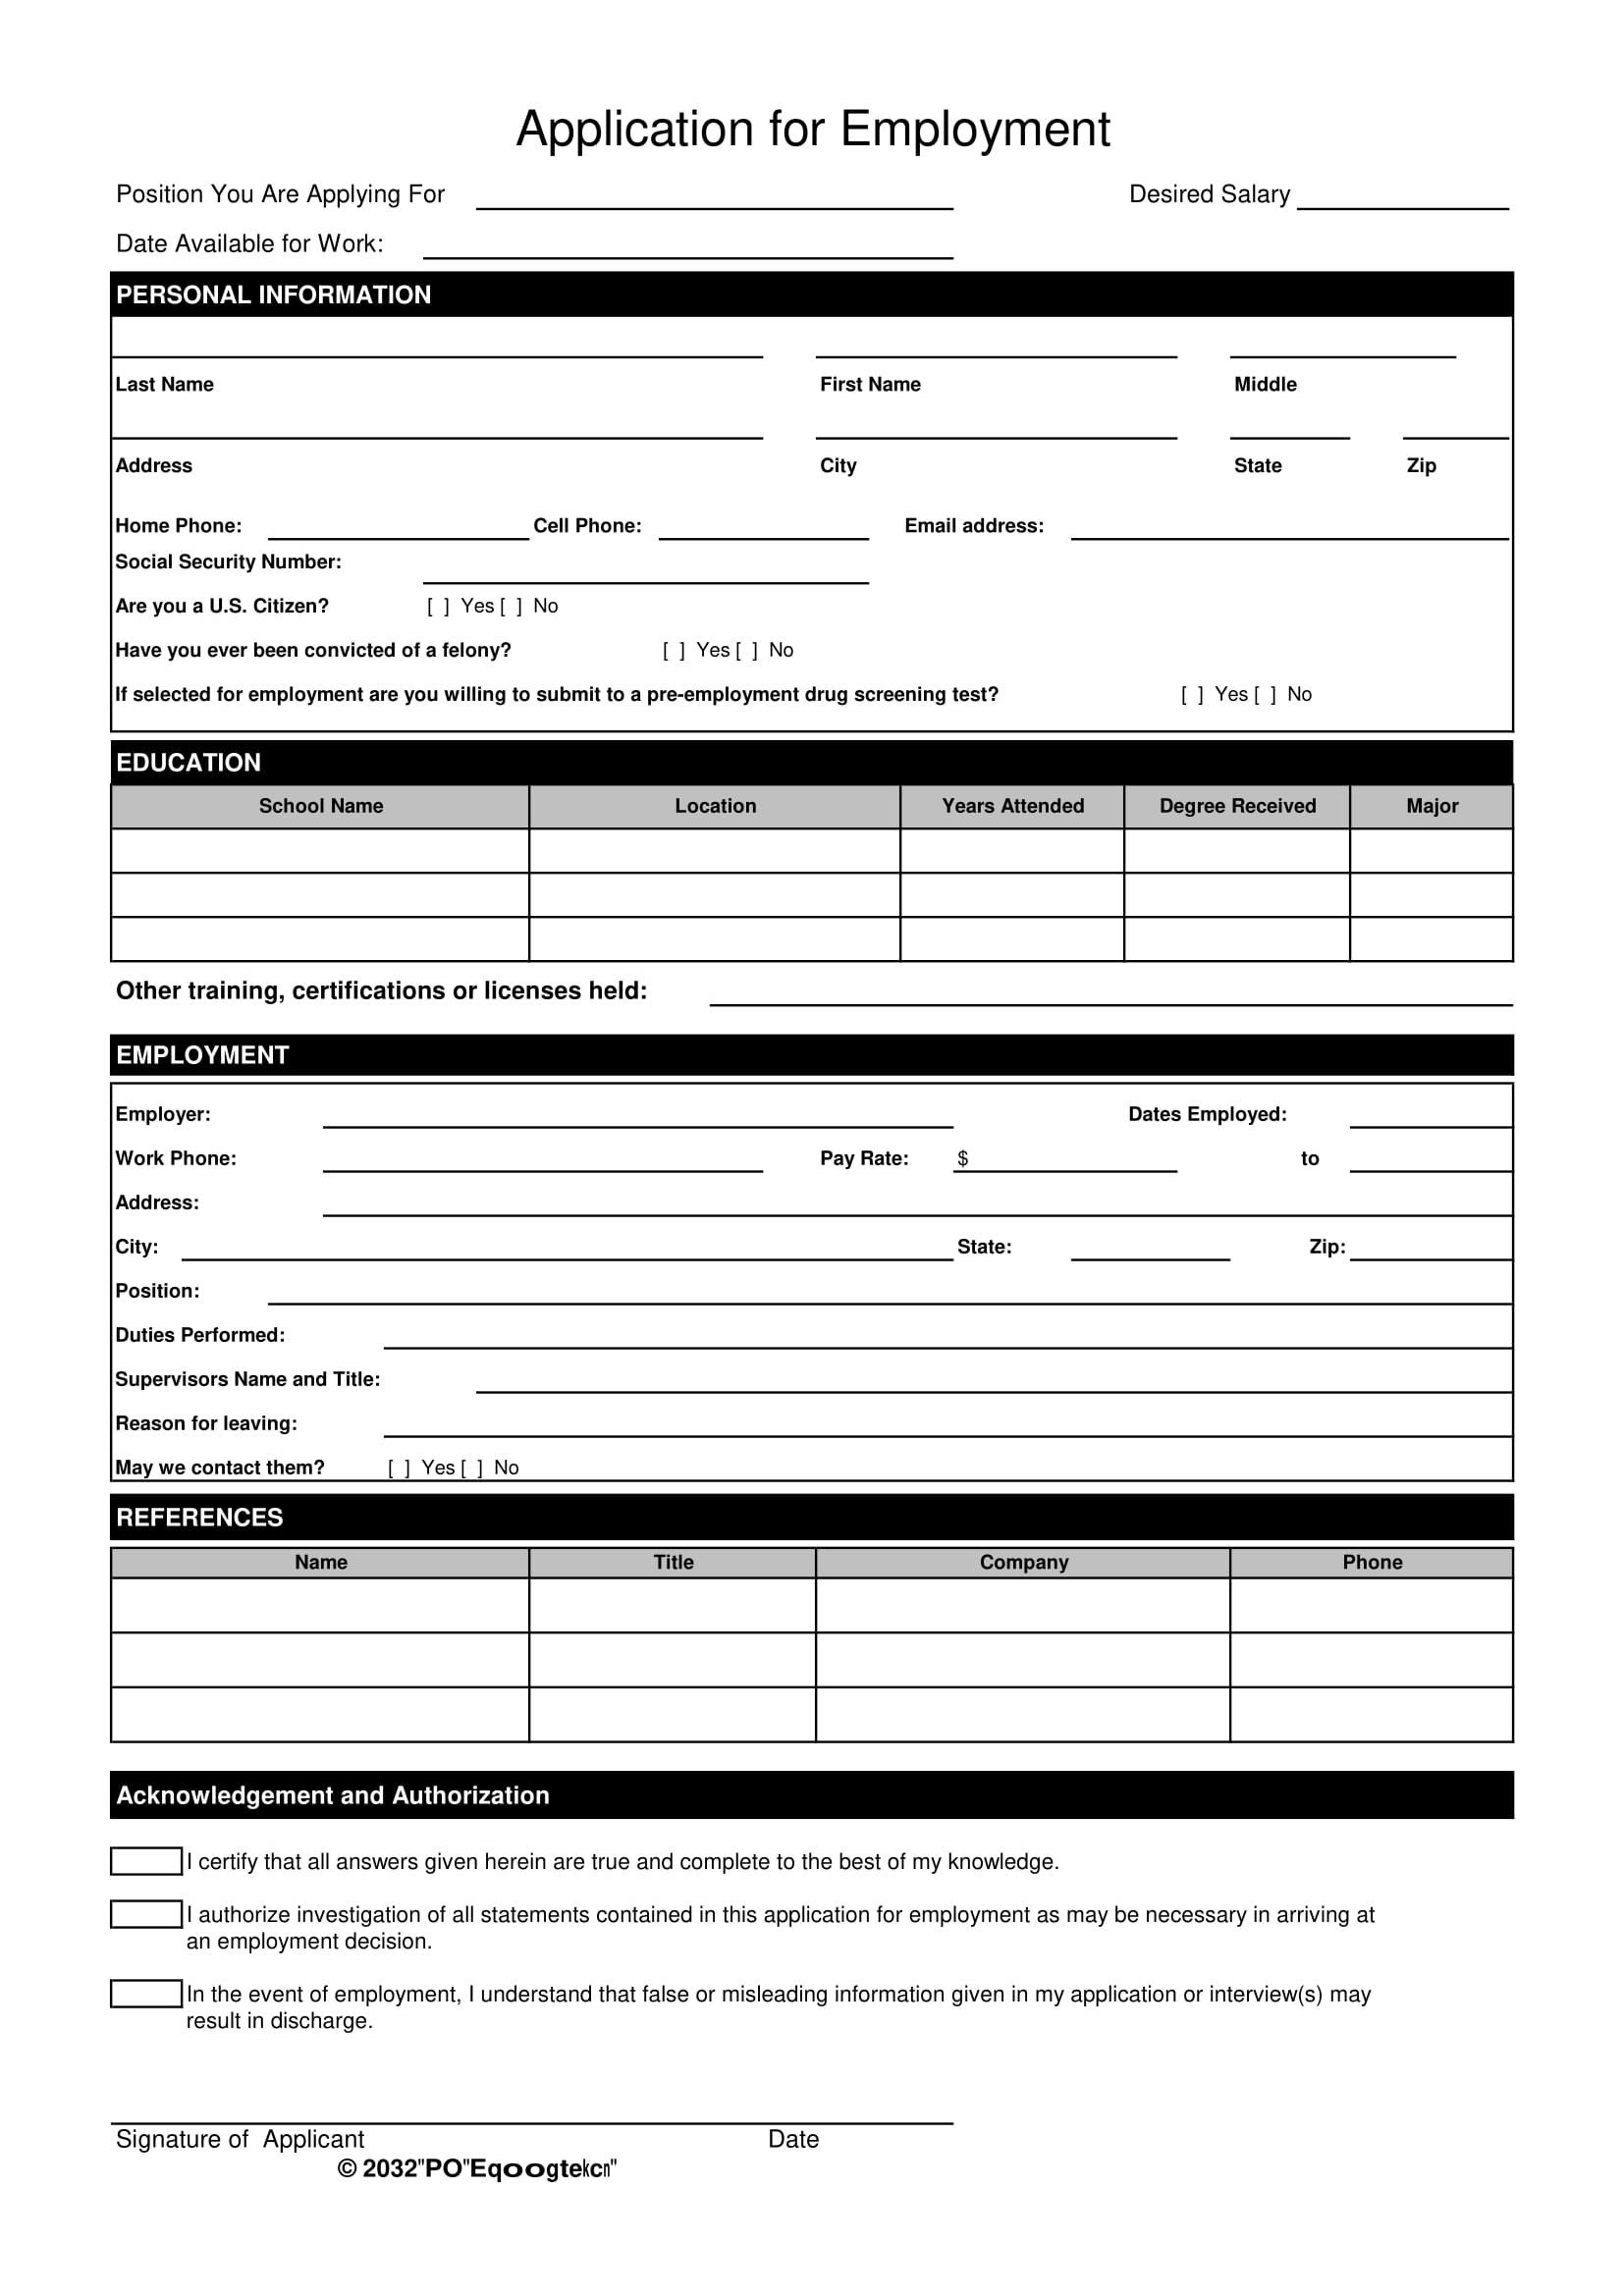 Sample application for any suitable job